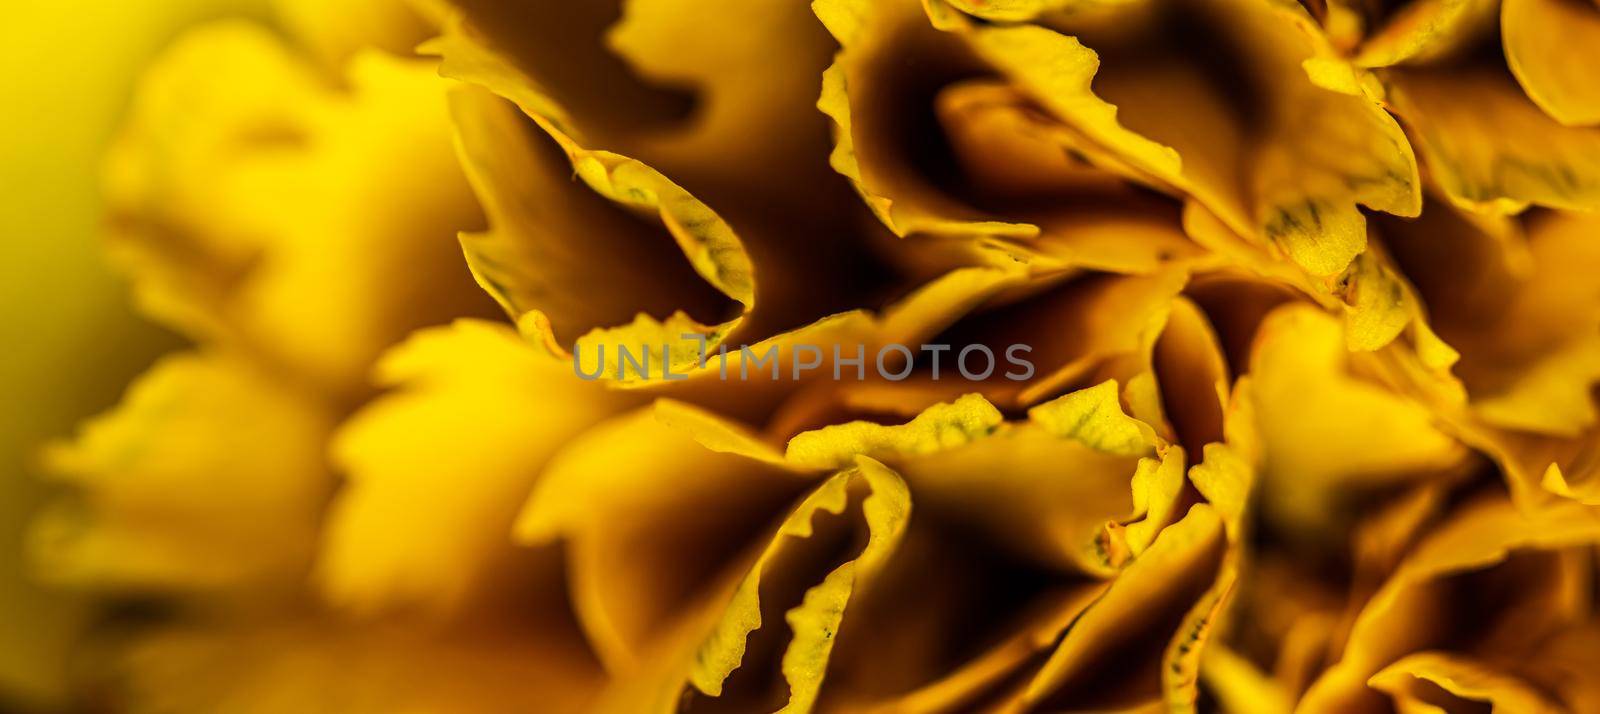 Abstract floral background, yellow carnation flower petals. Macro flowers backdrop for holiday brand design by Olayola